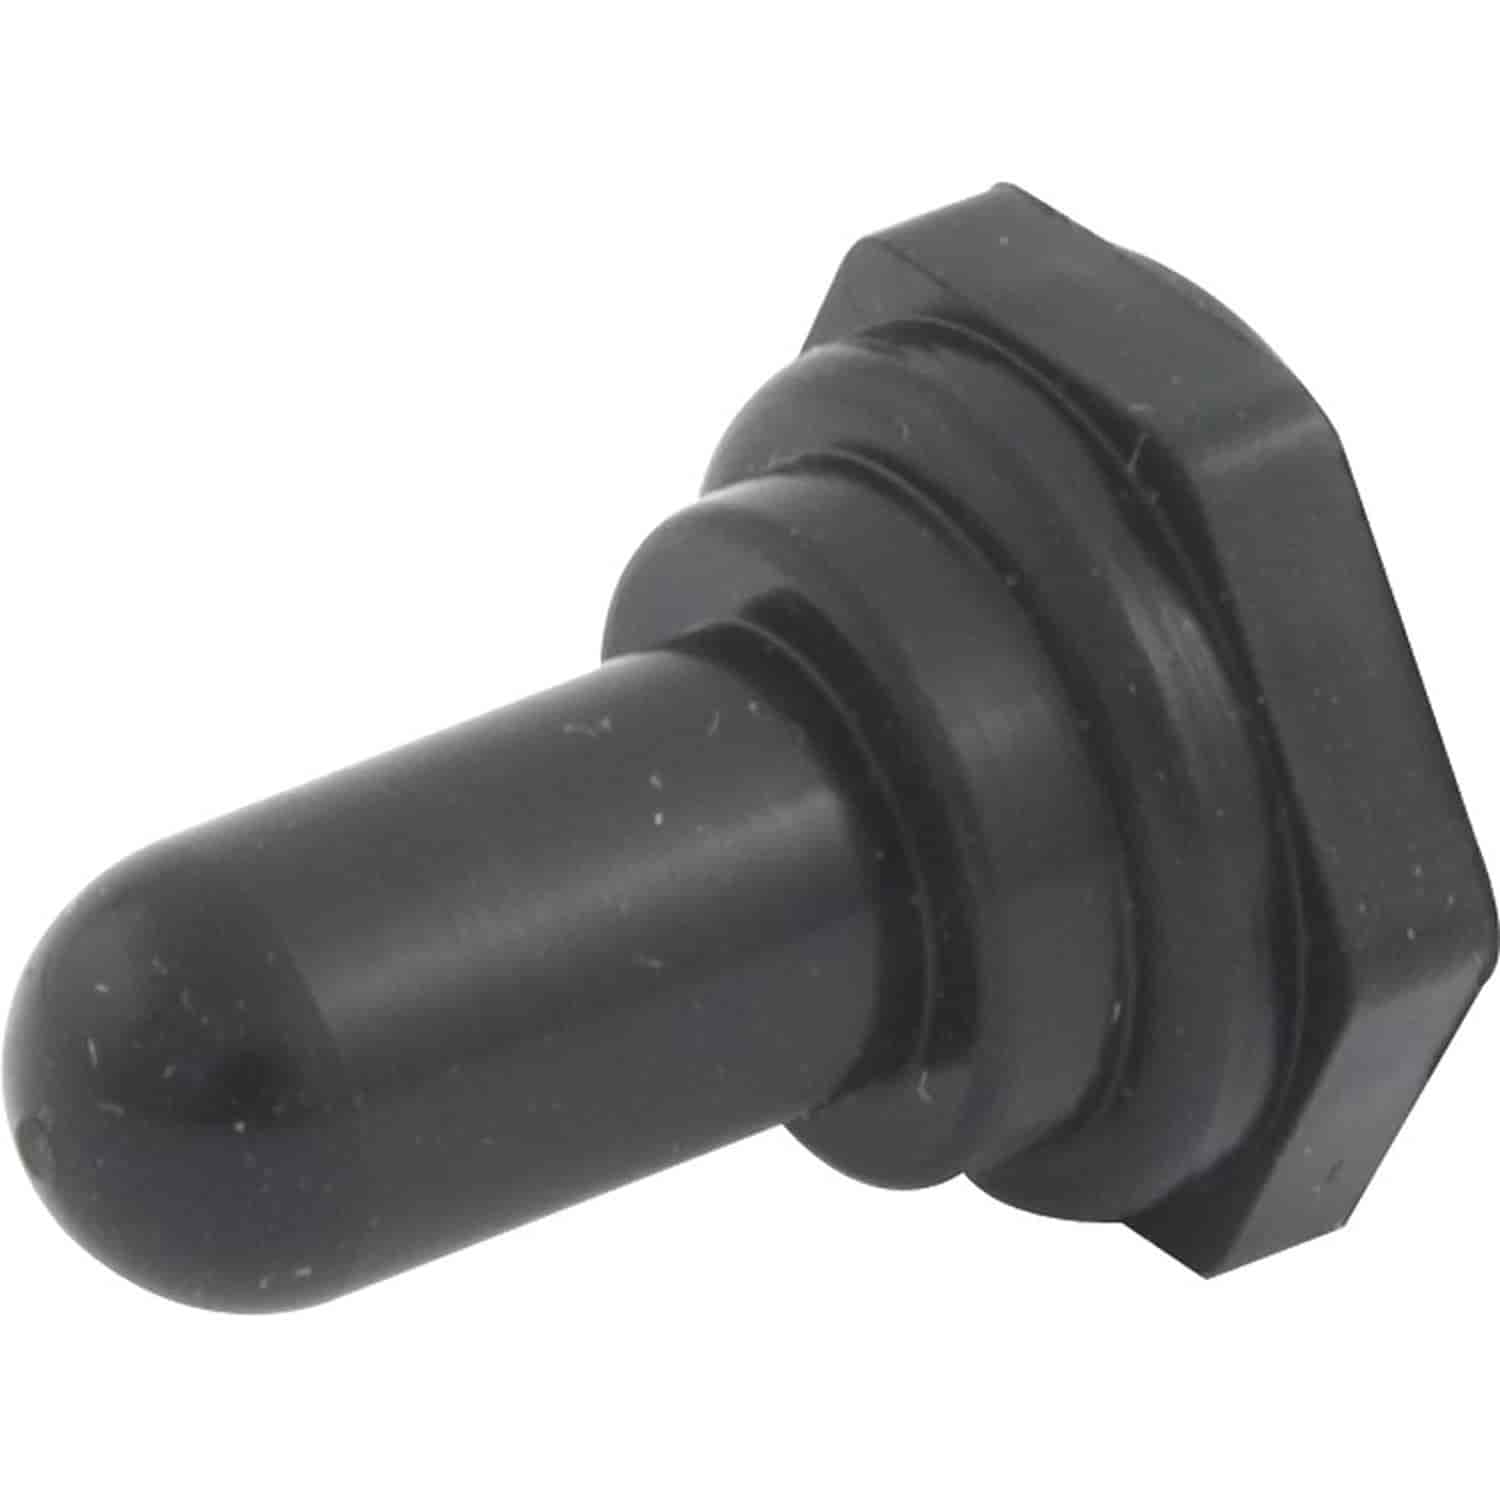 Replacement Toggle Switch Cover Weatherproof